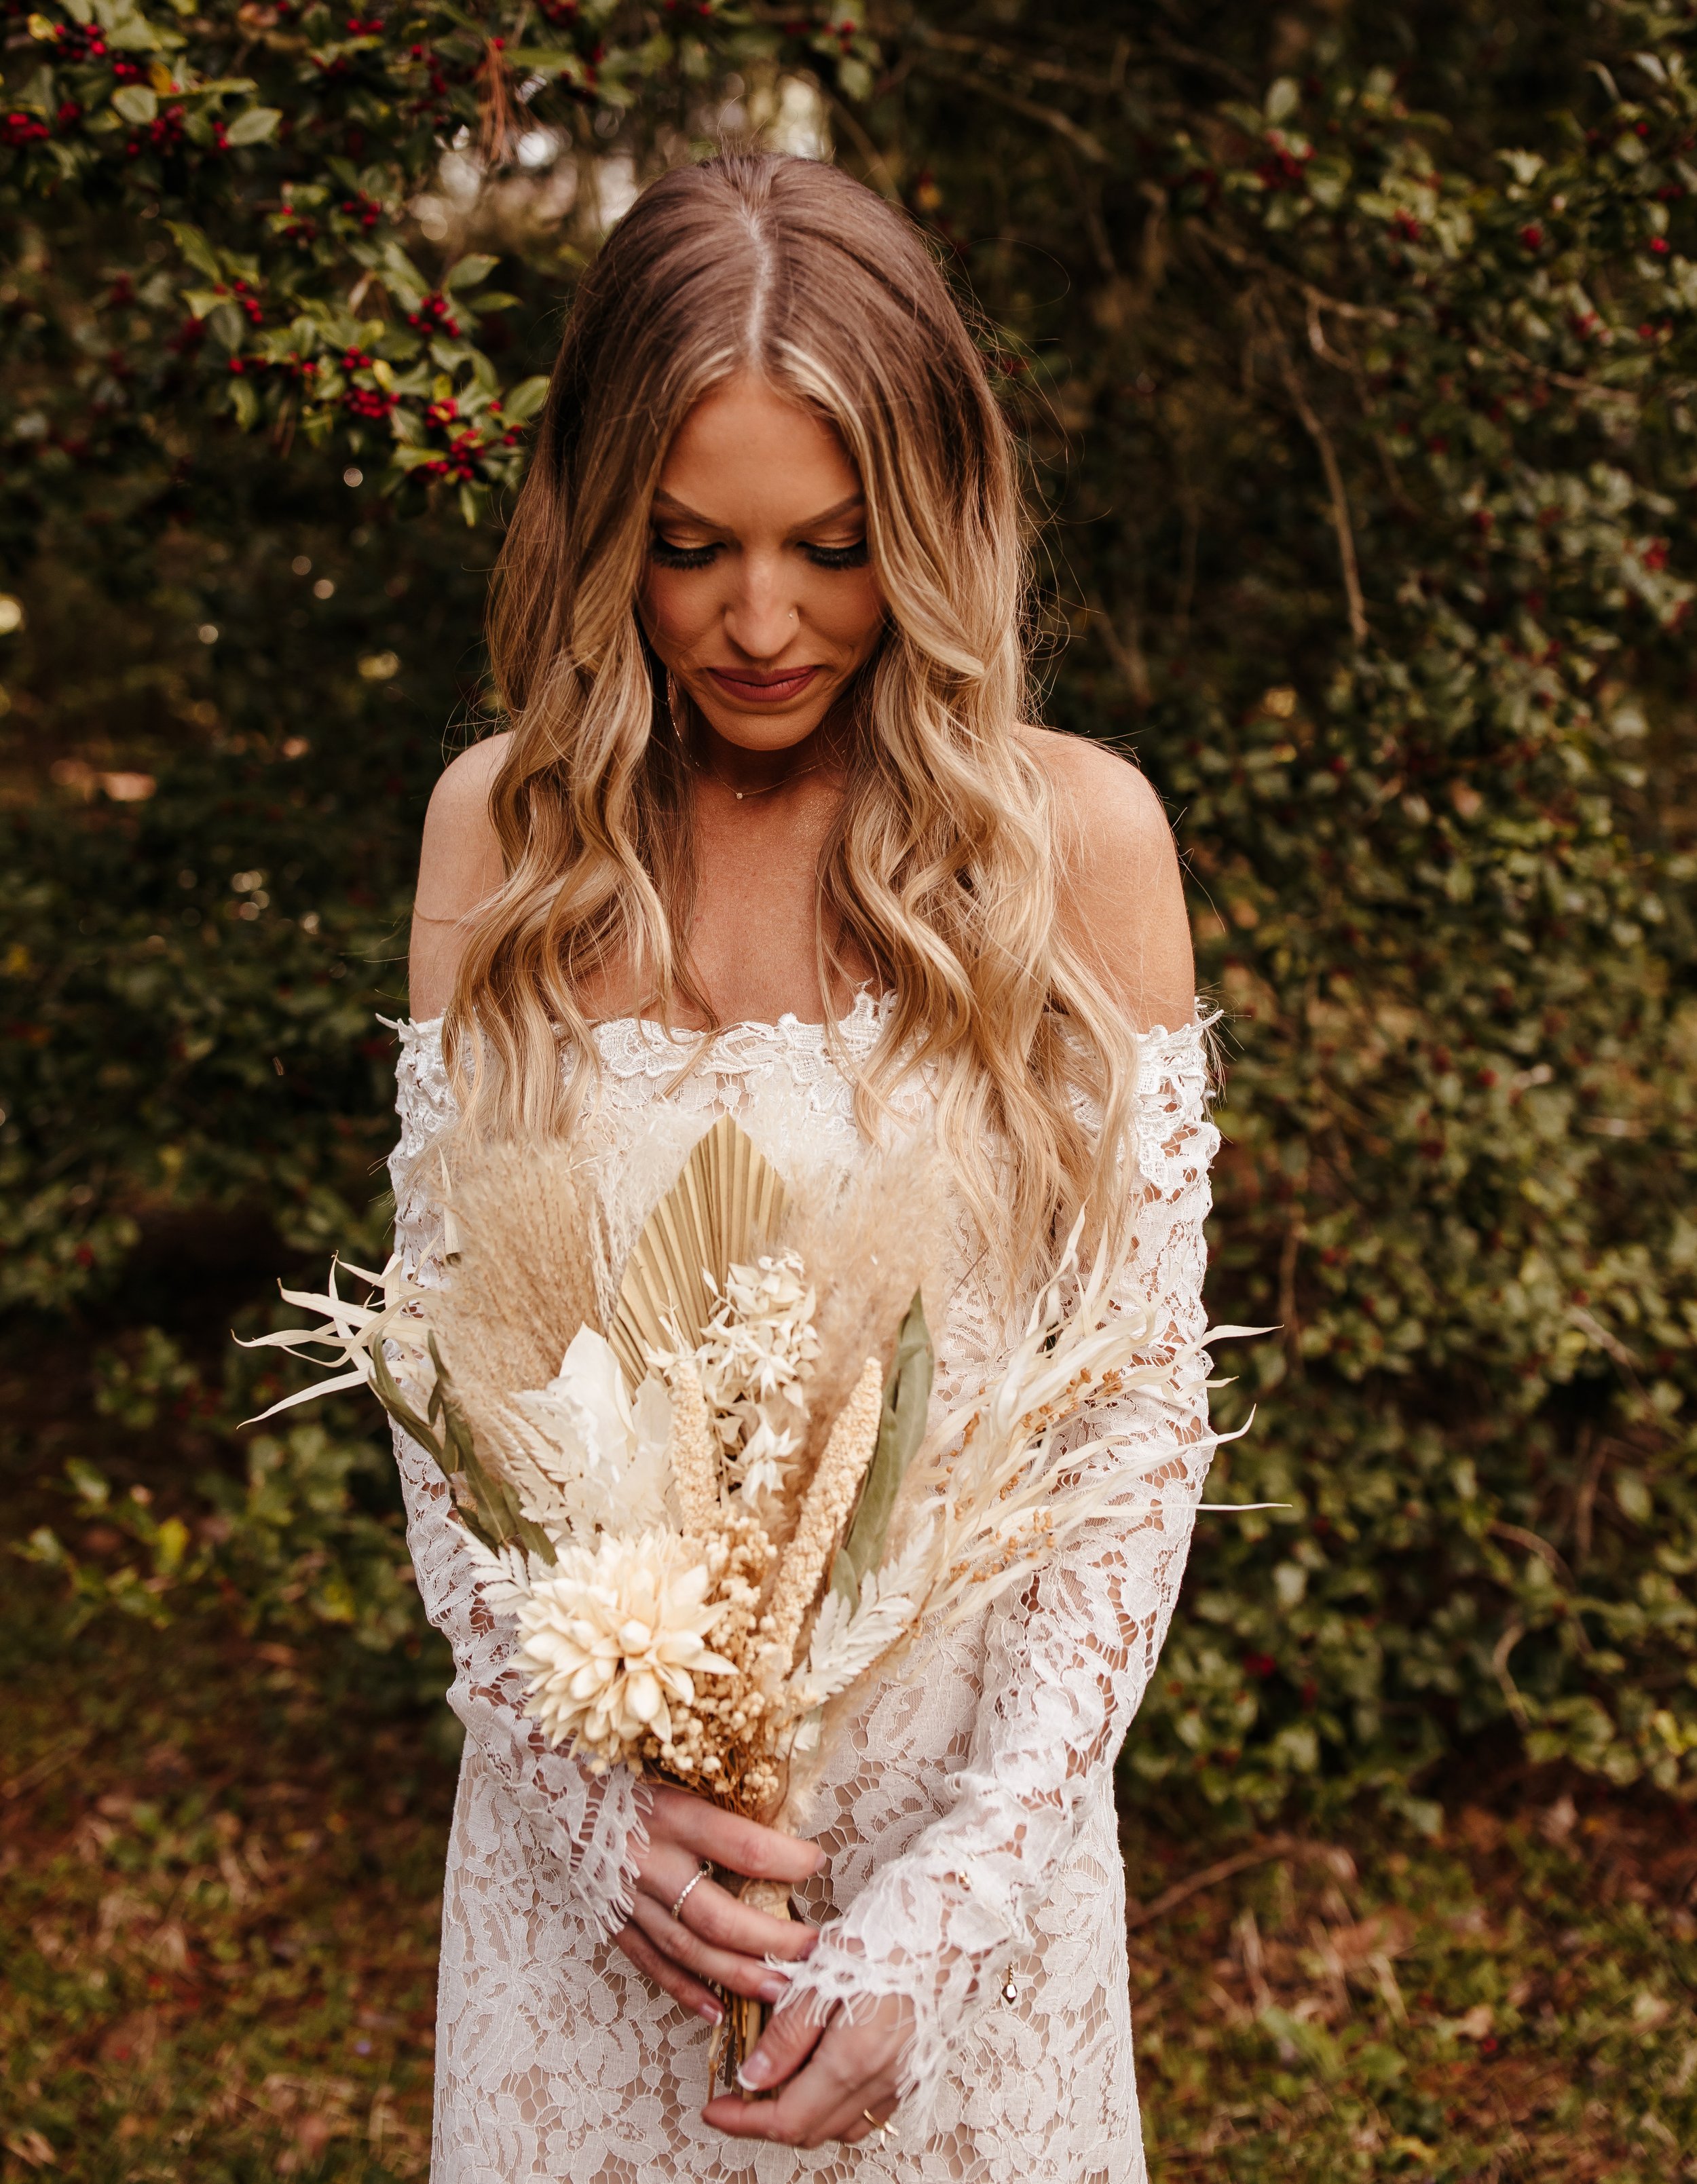 Southern Indiana elopement bride in lace wedding dress, hat and dried florals